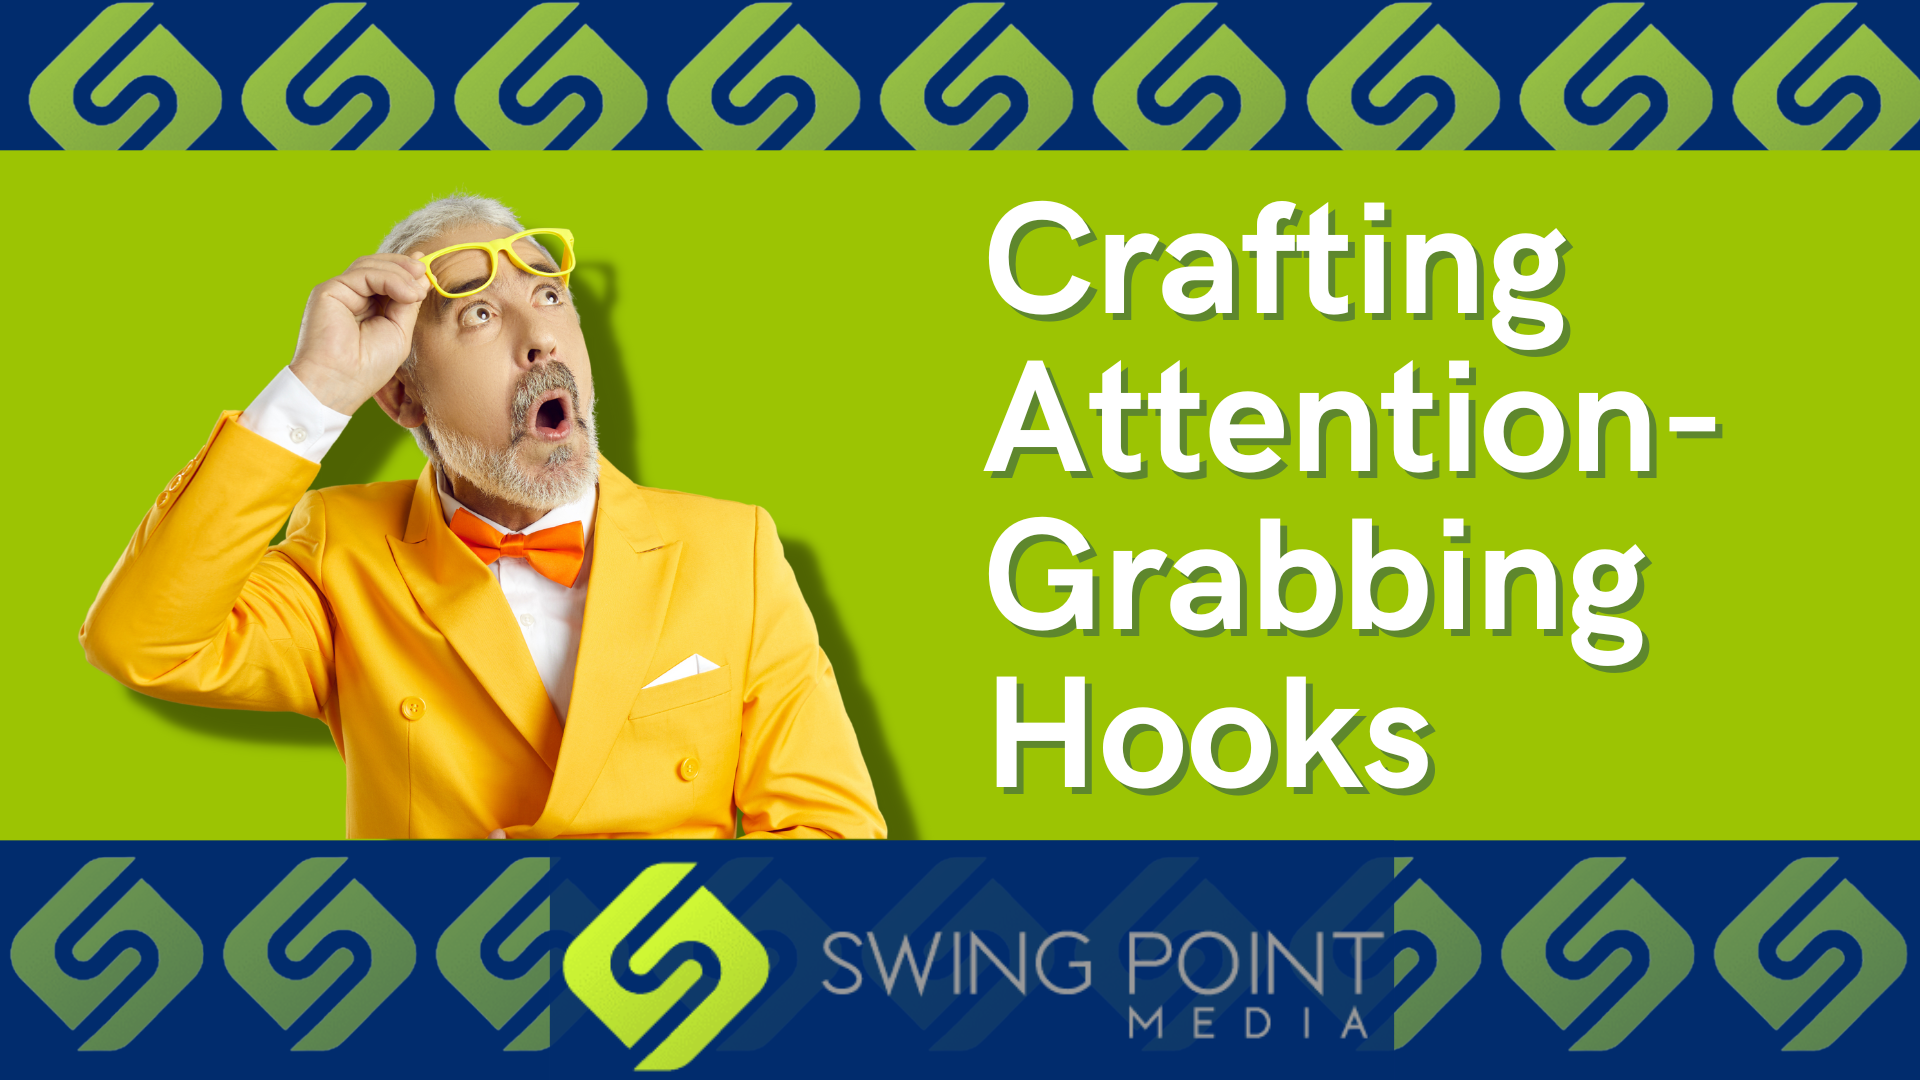 Crafting attention-grabbing hooks based on your avatar's life